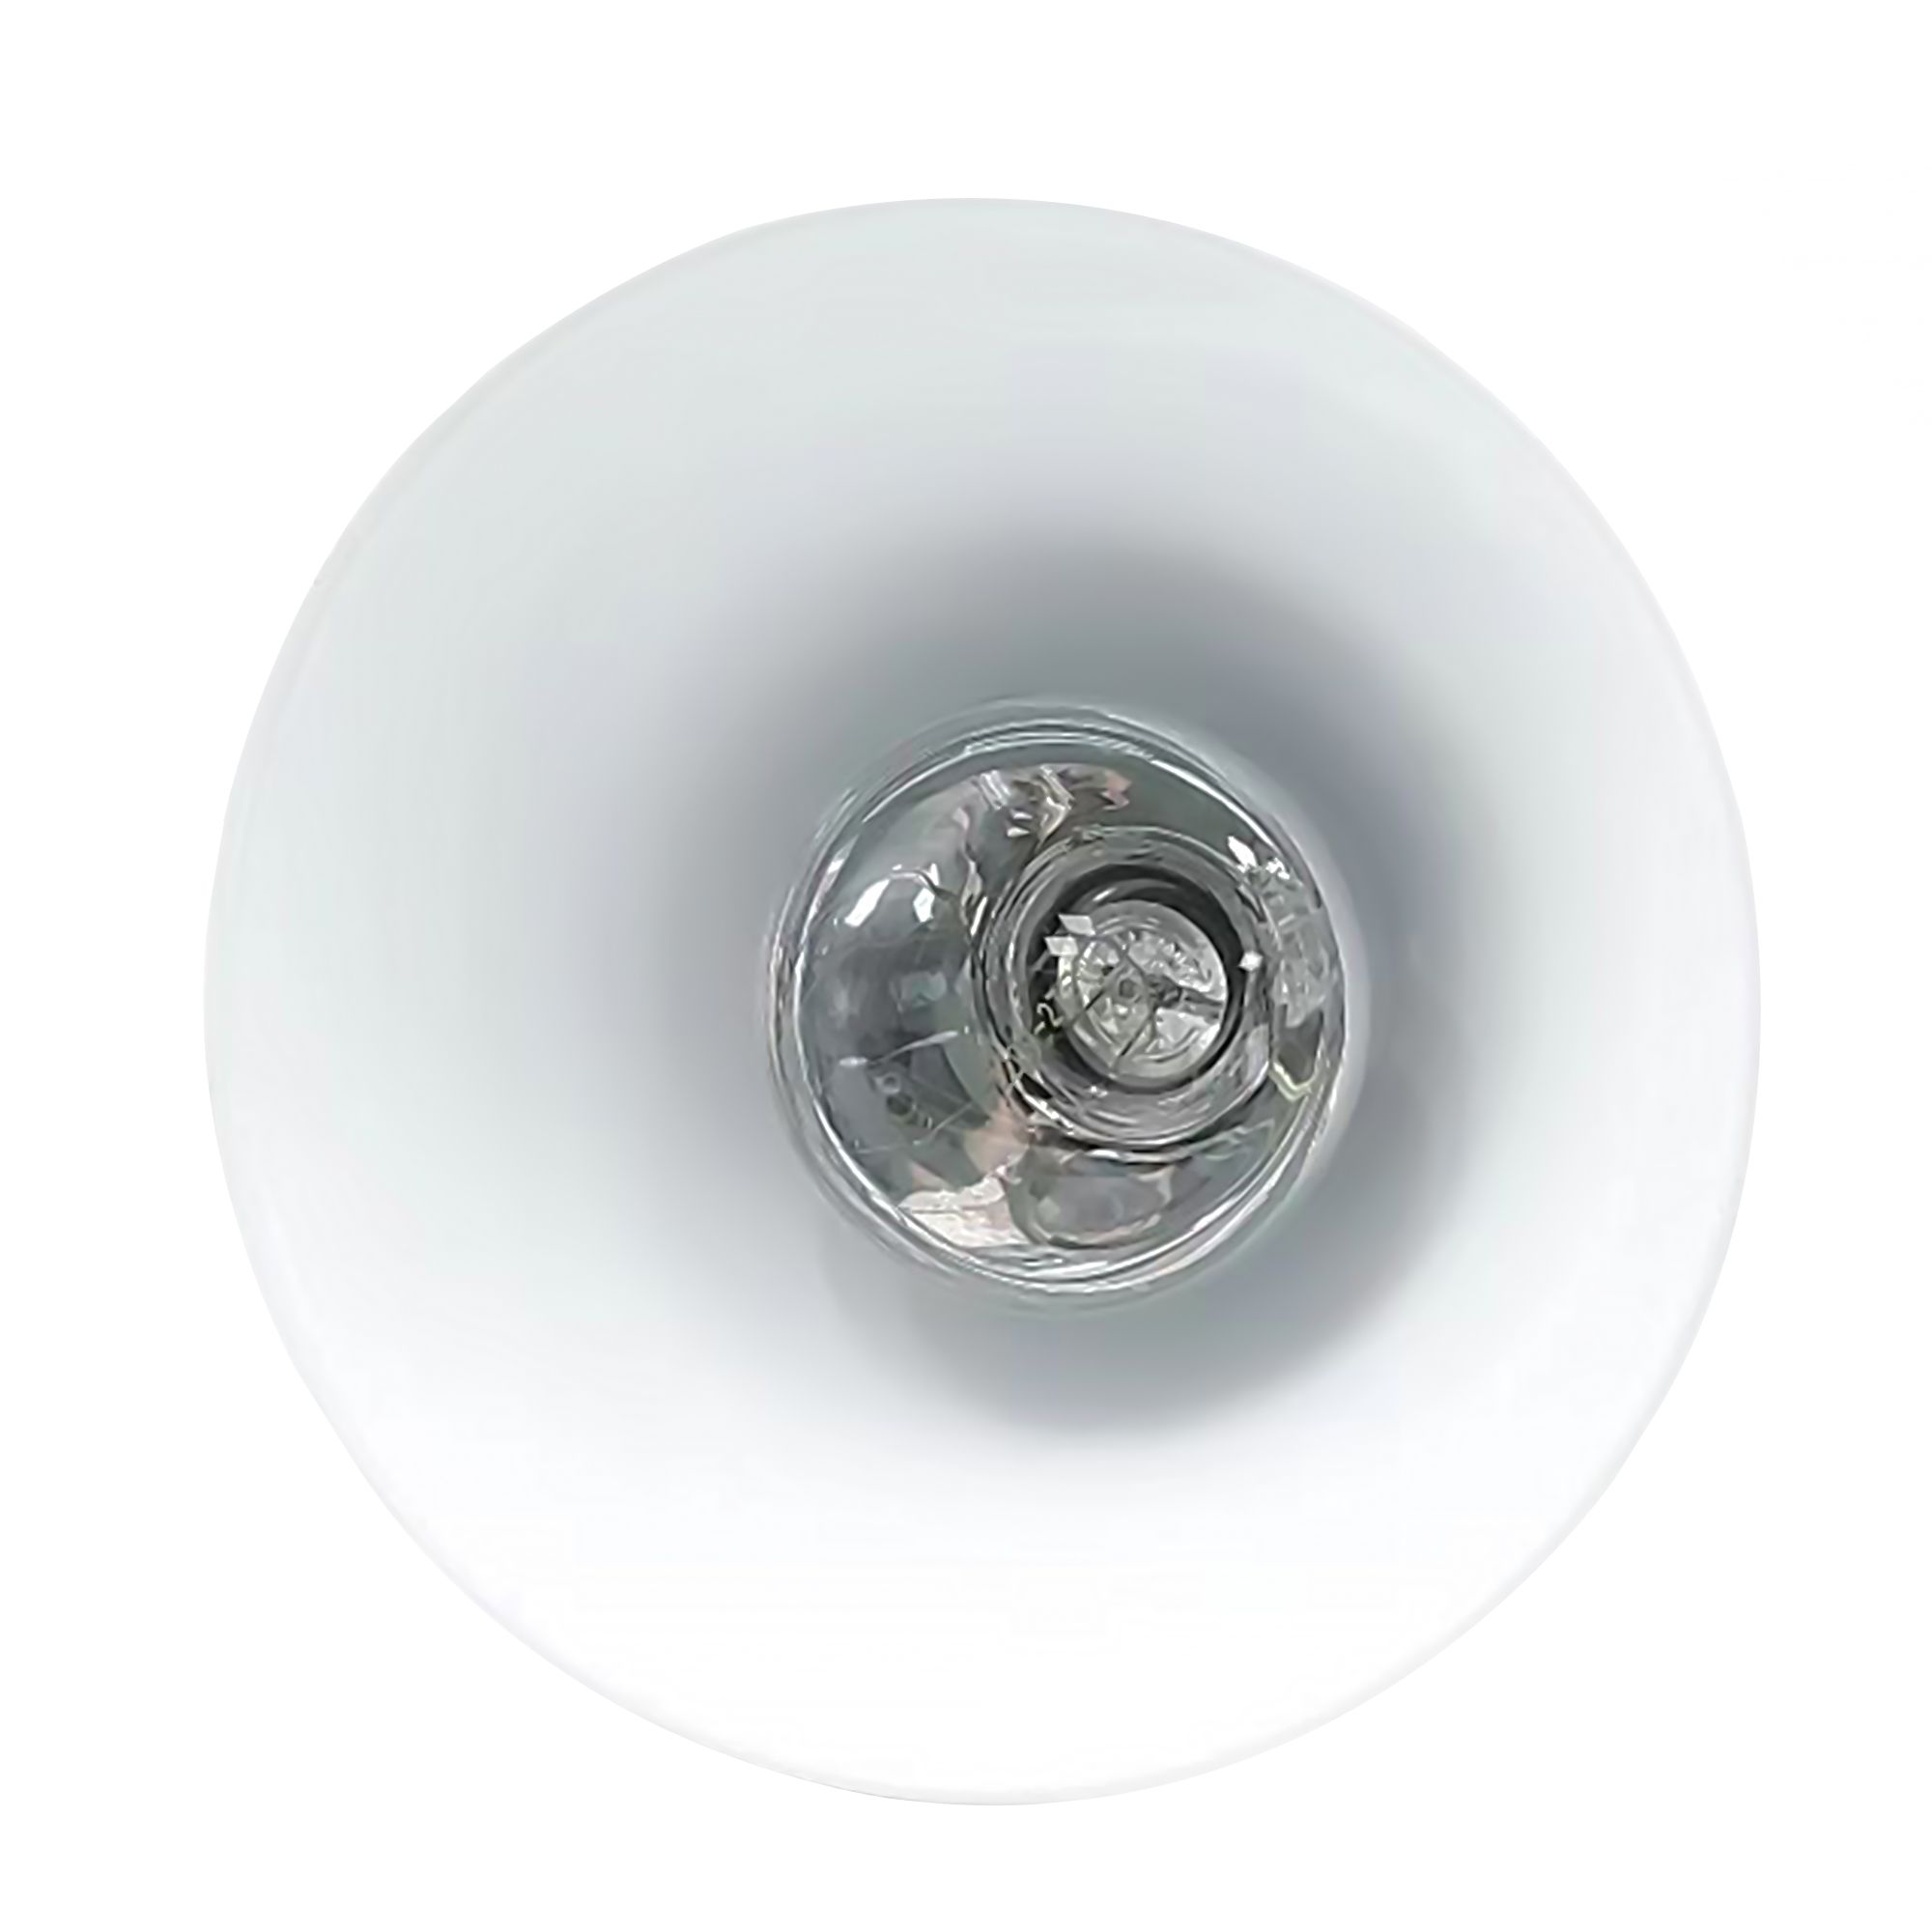 Pont thermique - infrarouge - 290 W - GN 1/1 - 1 lampe chauffante - Royal  Catering Lampe chauffante Lampe chauffante cuisine